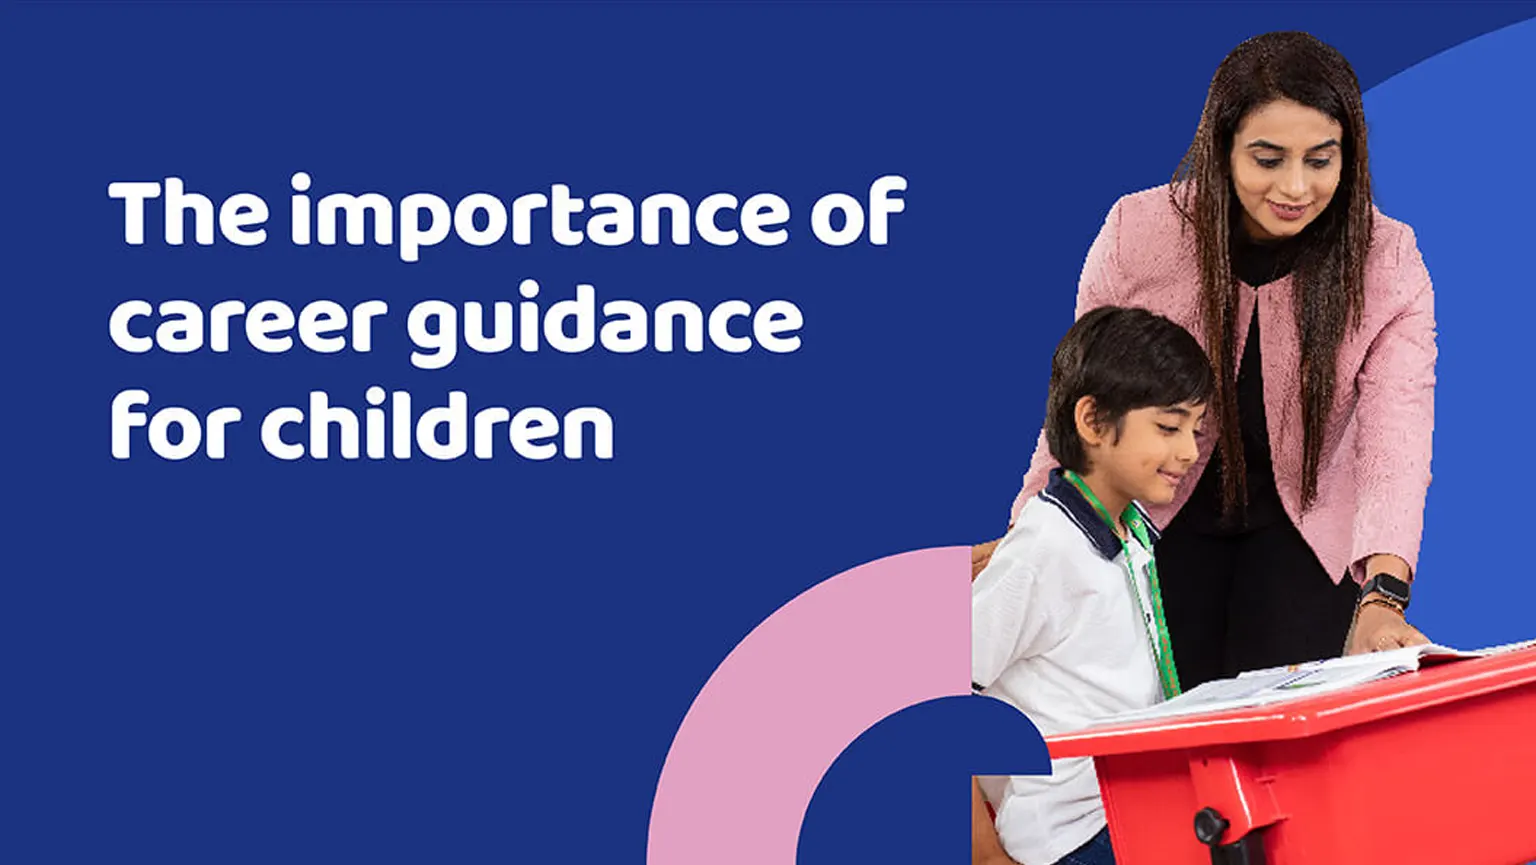 The importance of career guidance for children